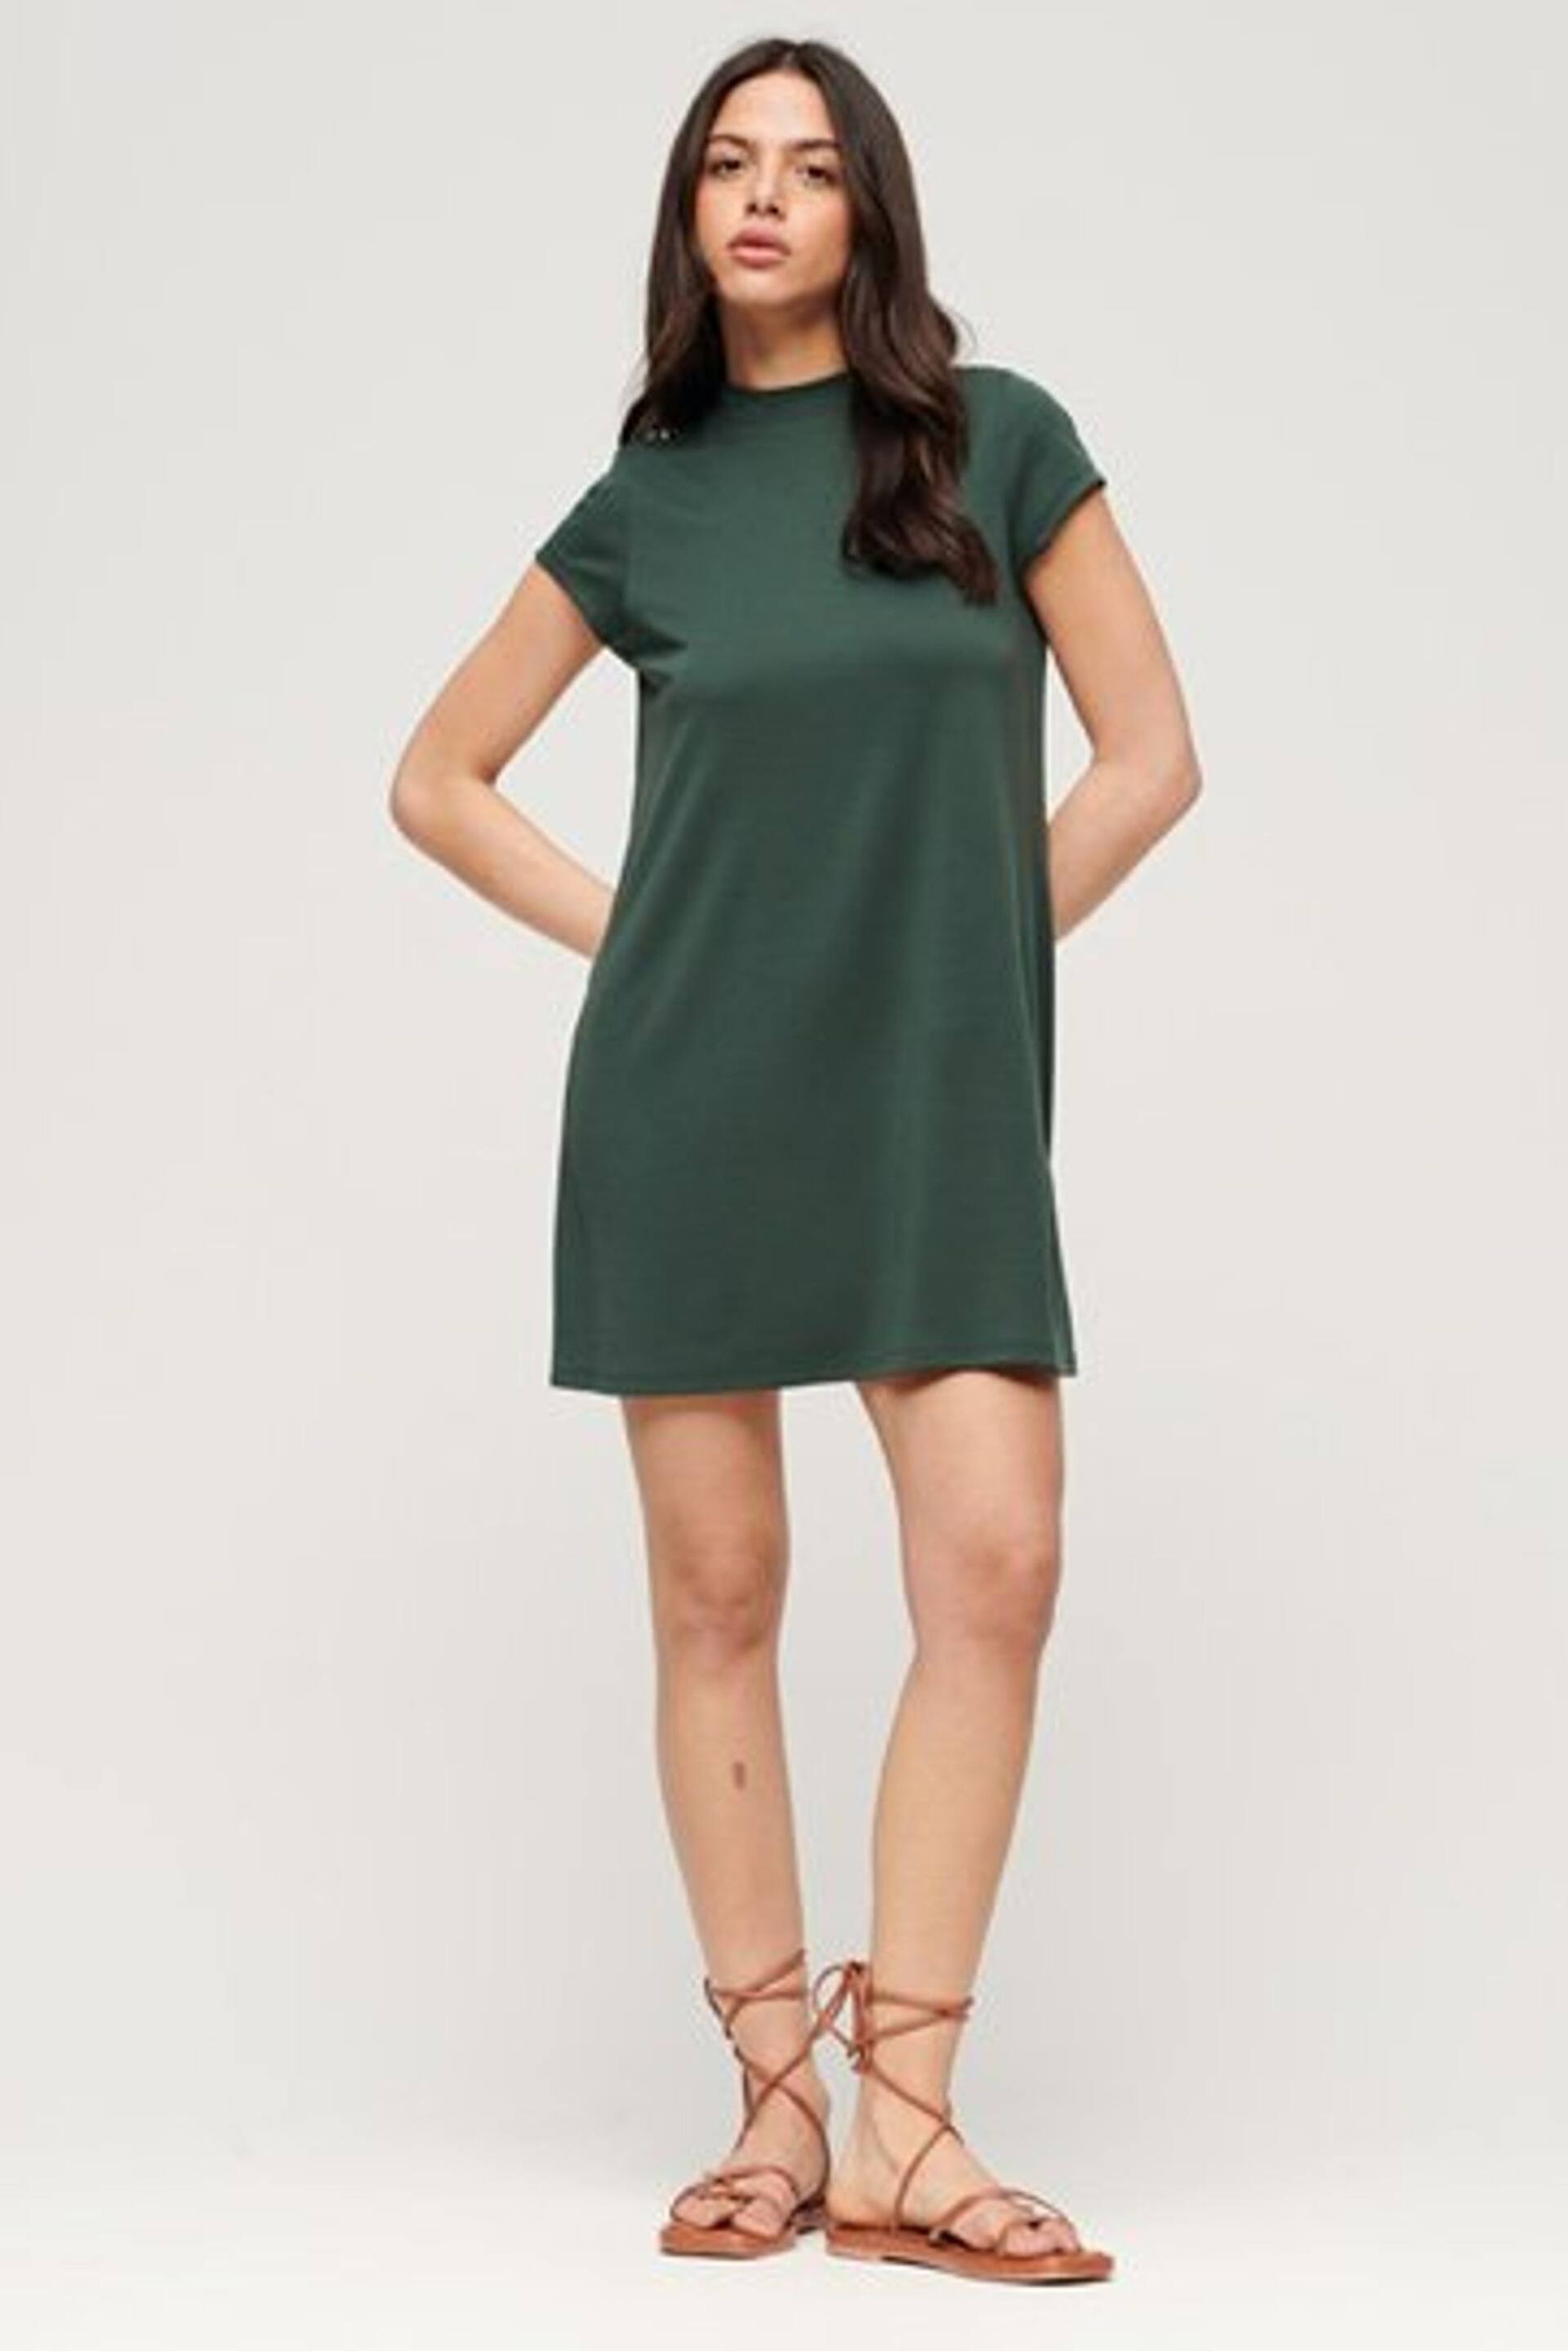 Superdry Green Short Sleeve A-line Mini Dress - Image 1 of 5